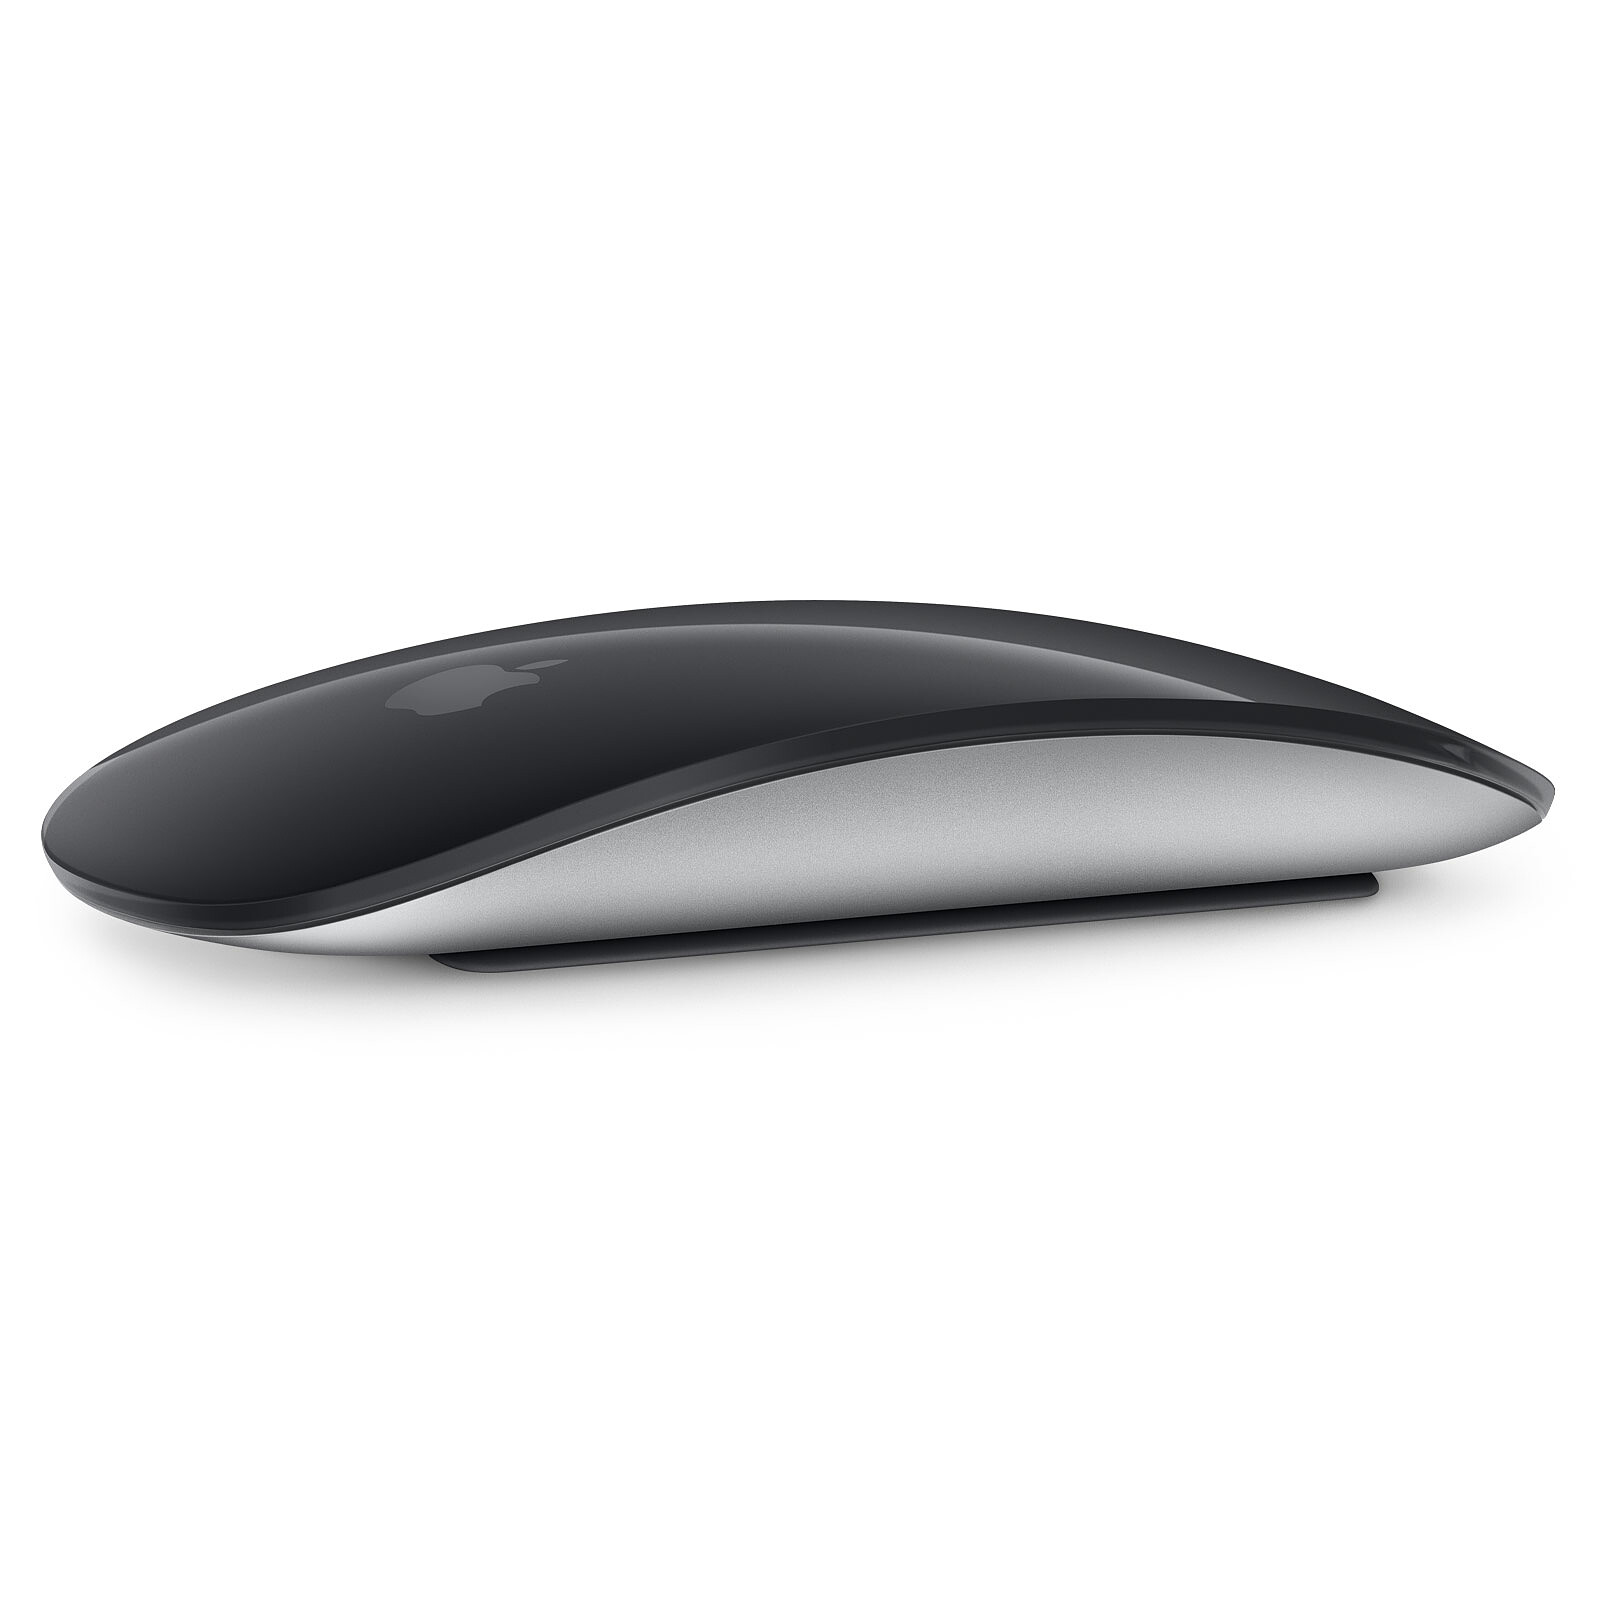 Magic mouse space gray harry styles fine line